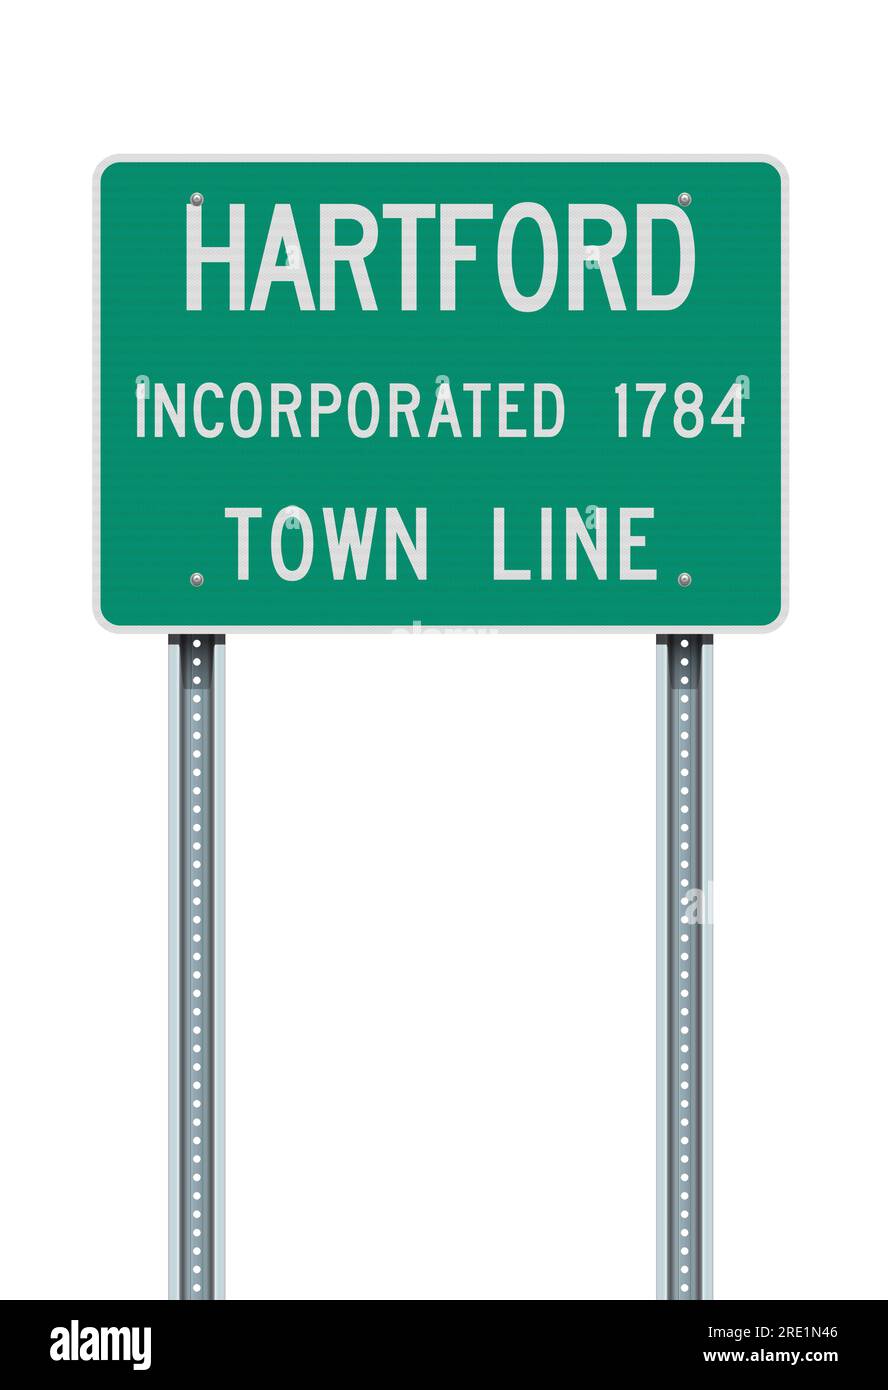 Vector illustration of the Hartford (Connecticut) City Limit green road sign on metallic posts Stock Vector